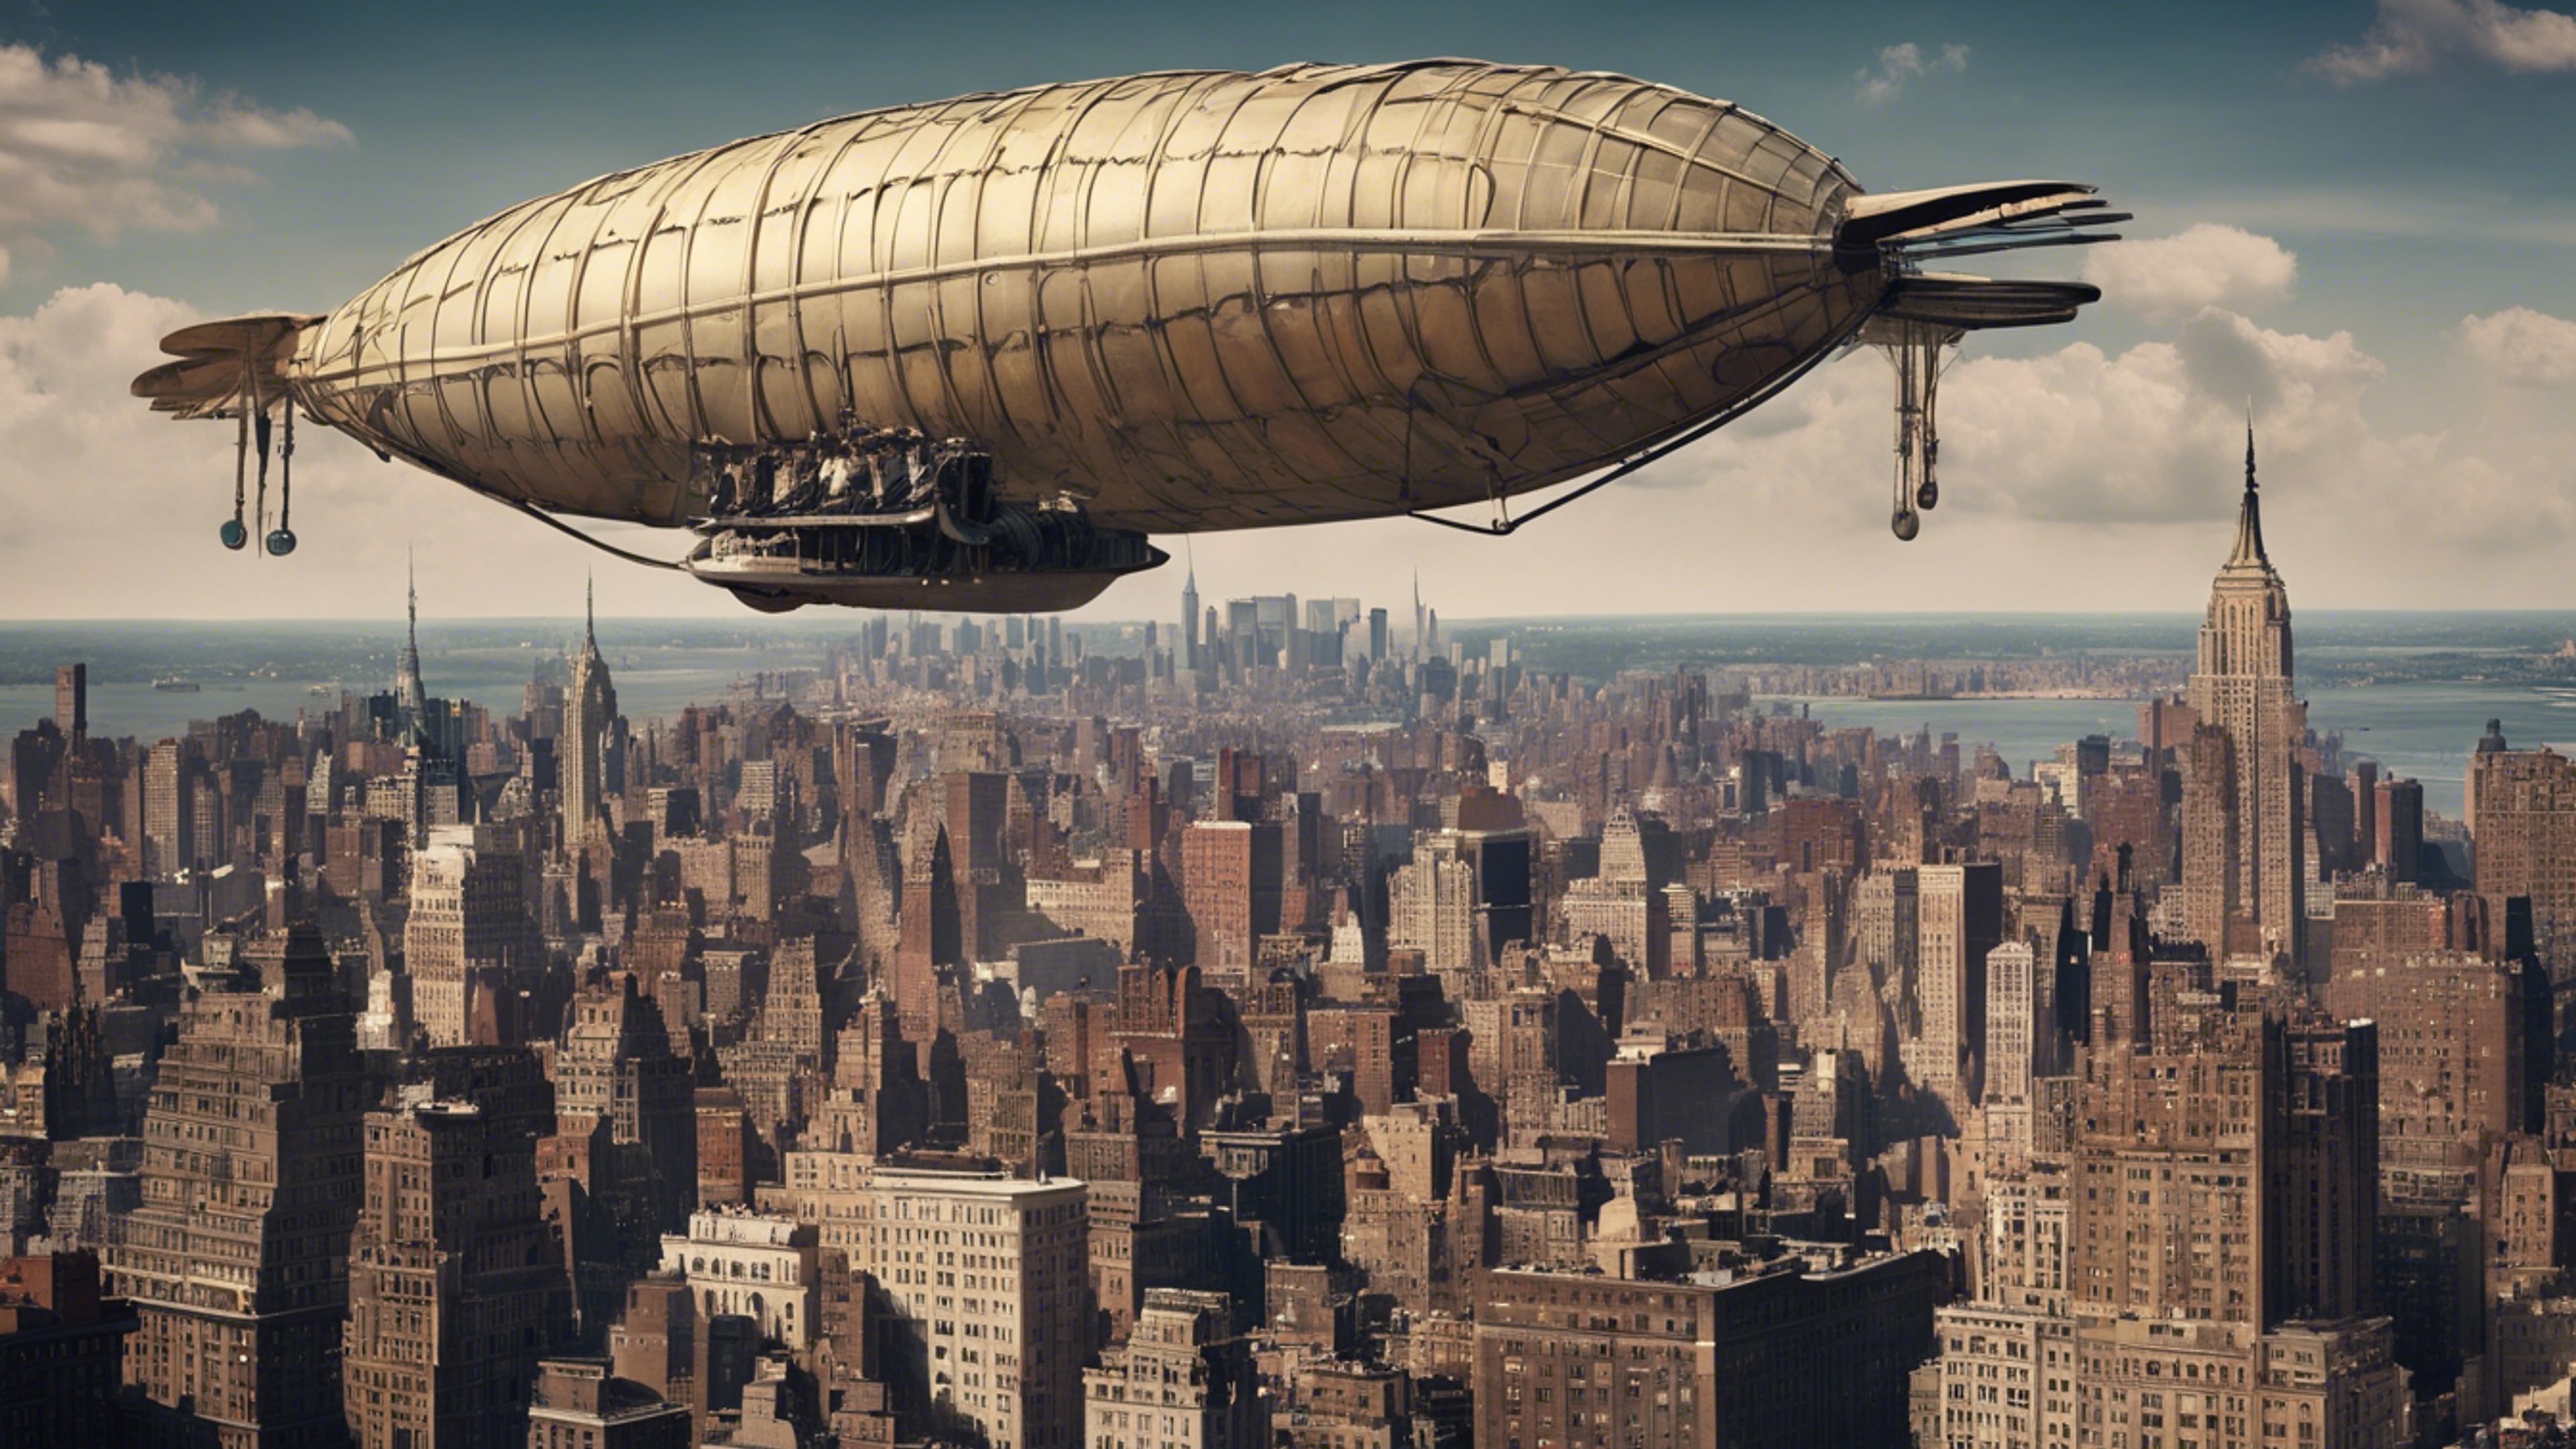 A nostalgic skyline view of 1920s New York City, peppered with zeppelins. Тапет[5c42609b28fb4c129601]